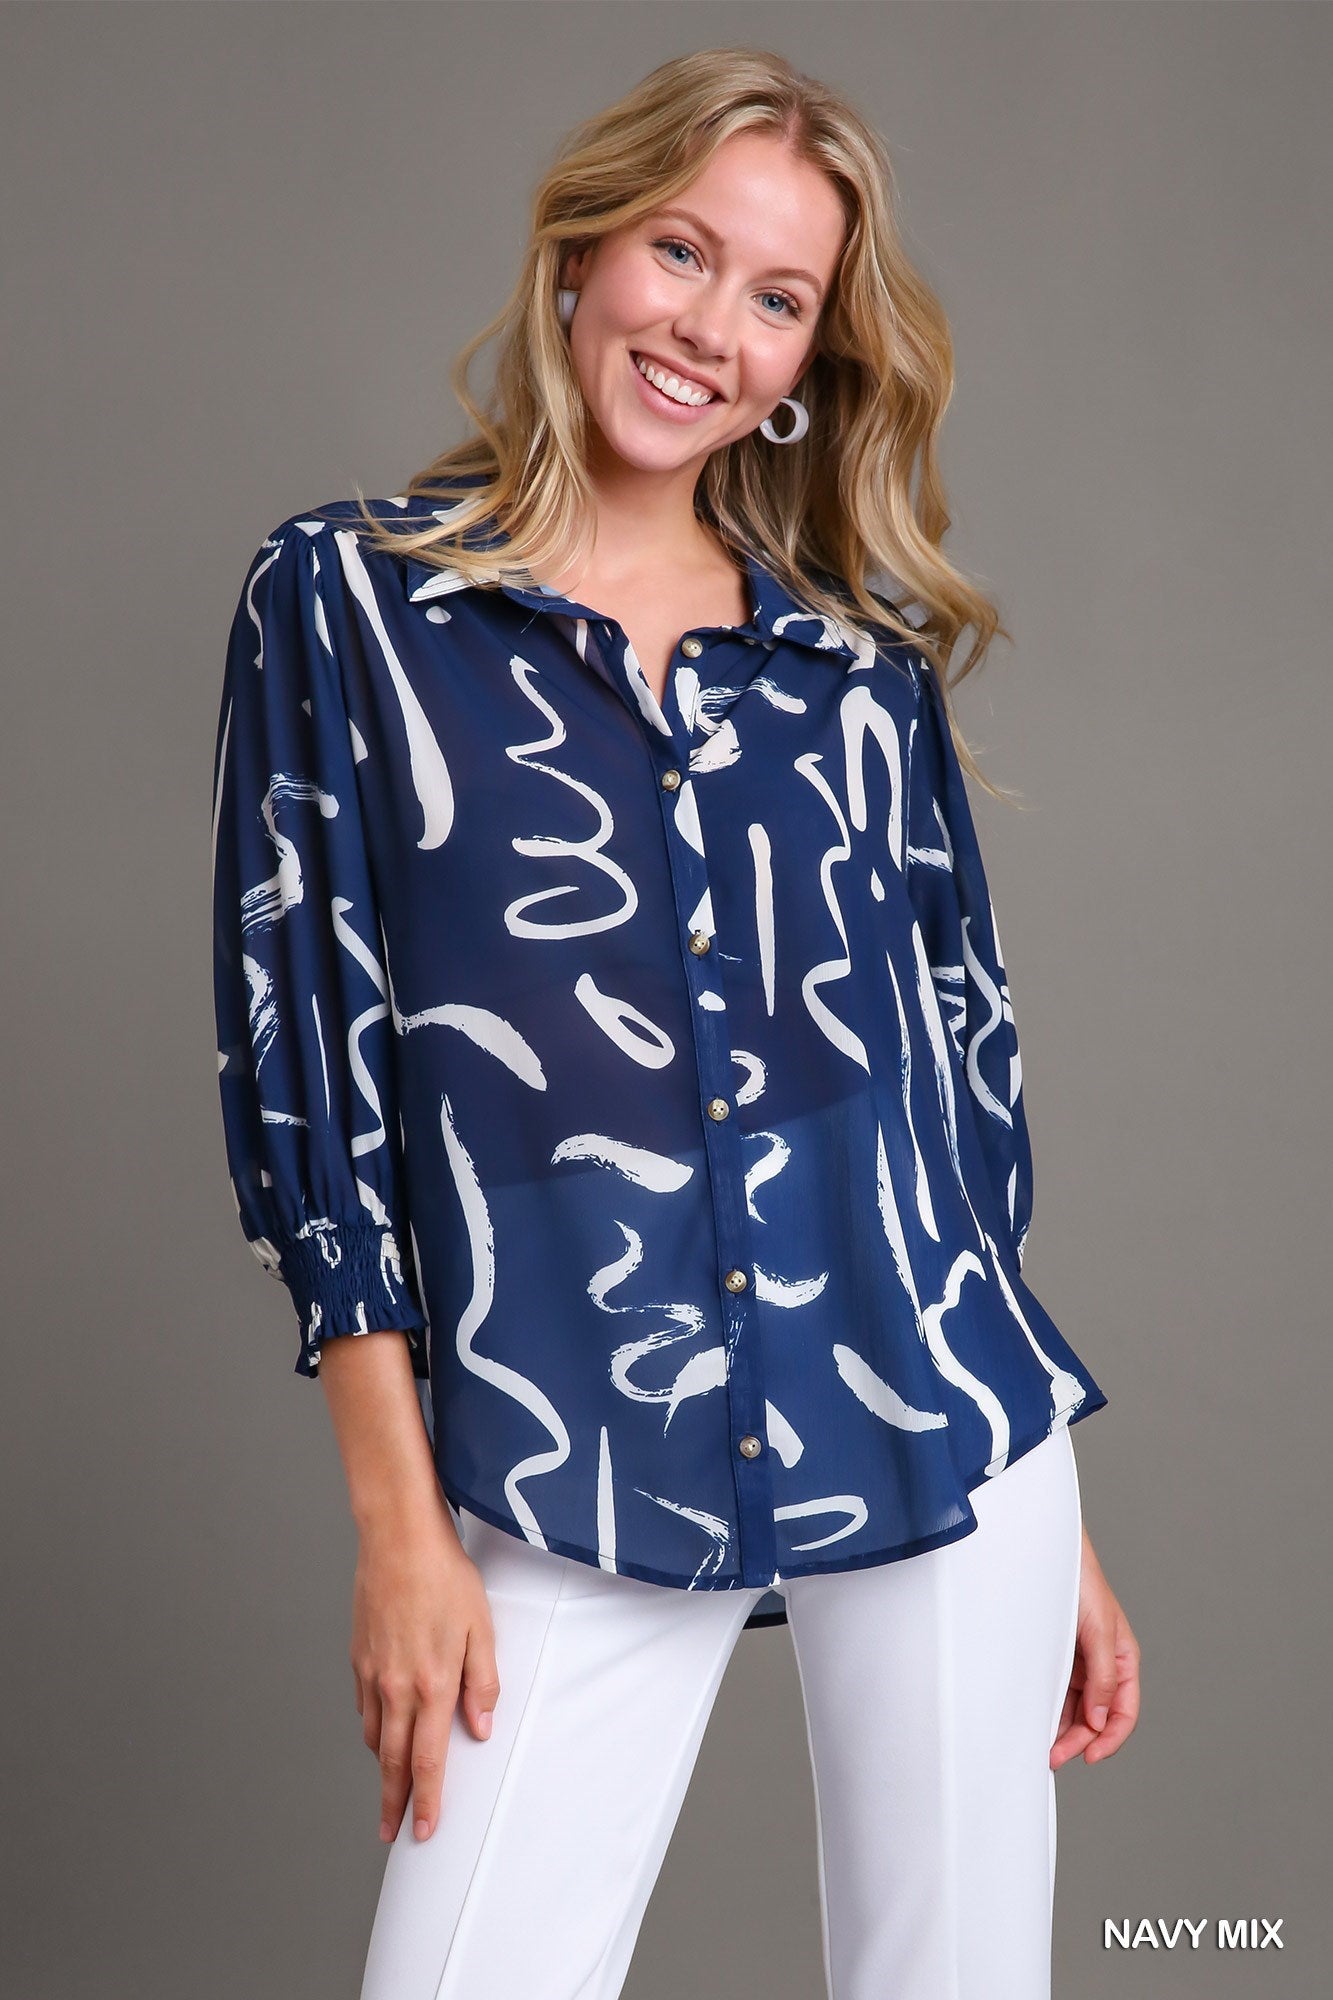 Navy Texture Woven Print Top with Cuffed Long Sleeve & High Low Hem